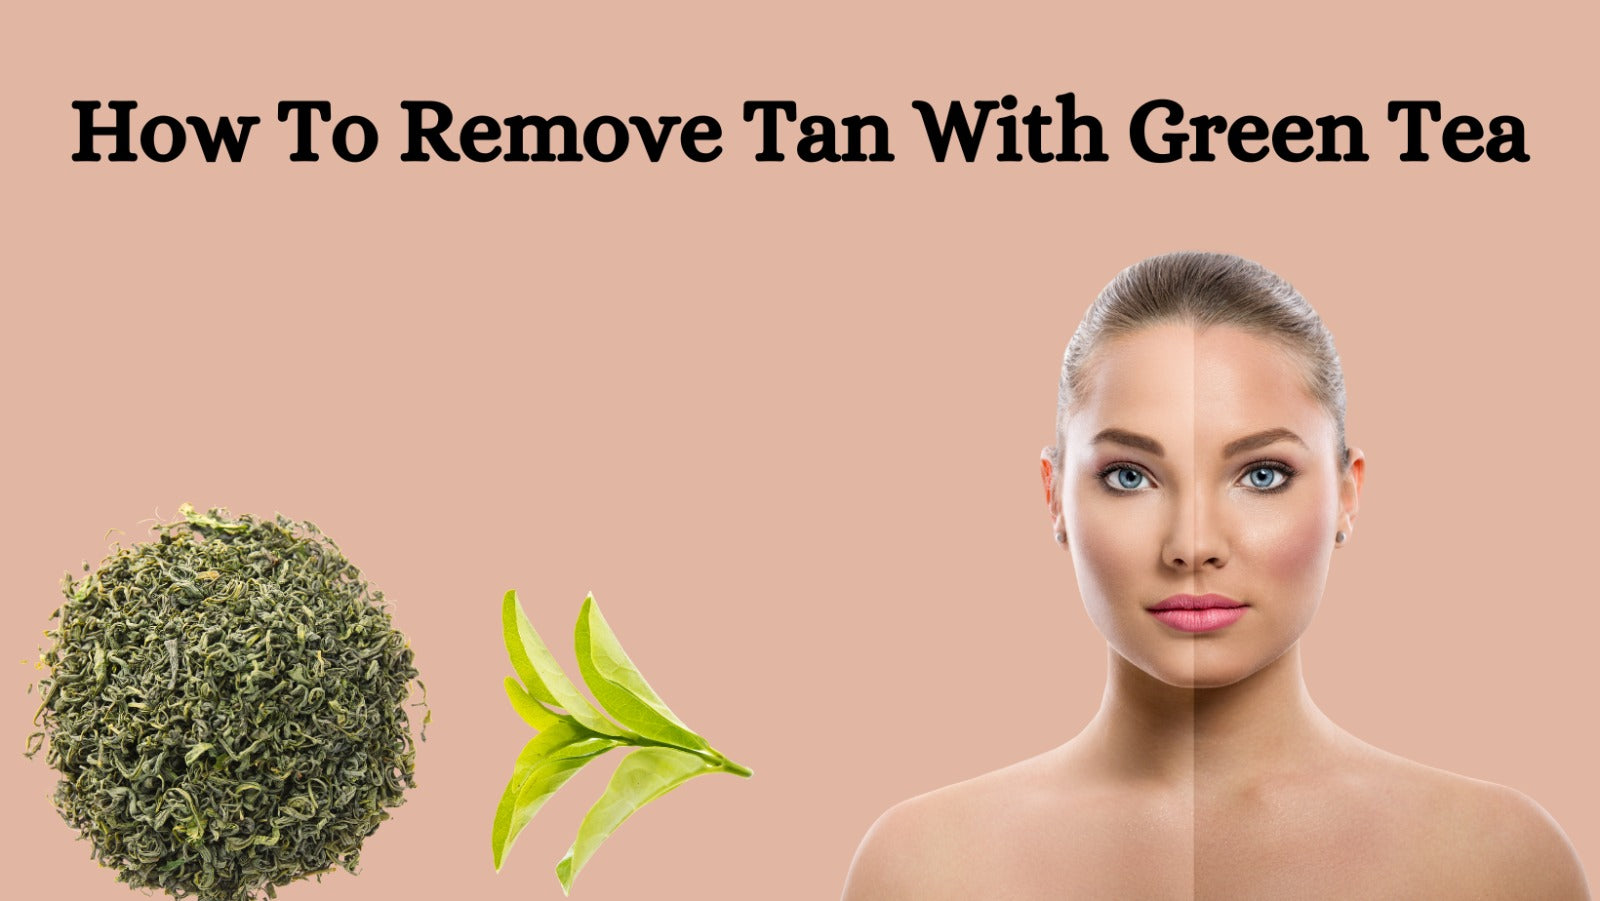 How To Remove Tan With Green Tea